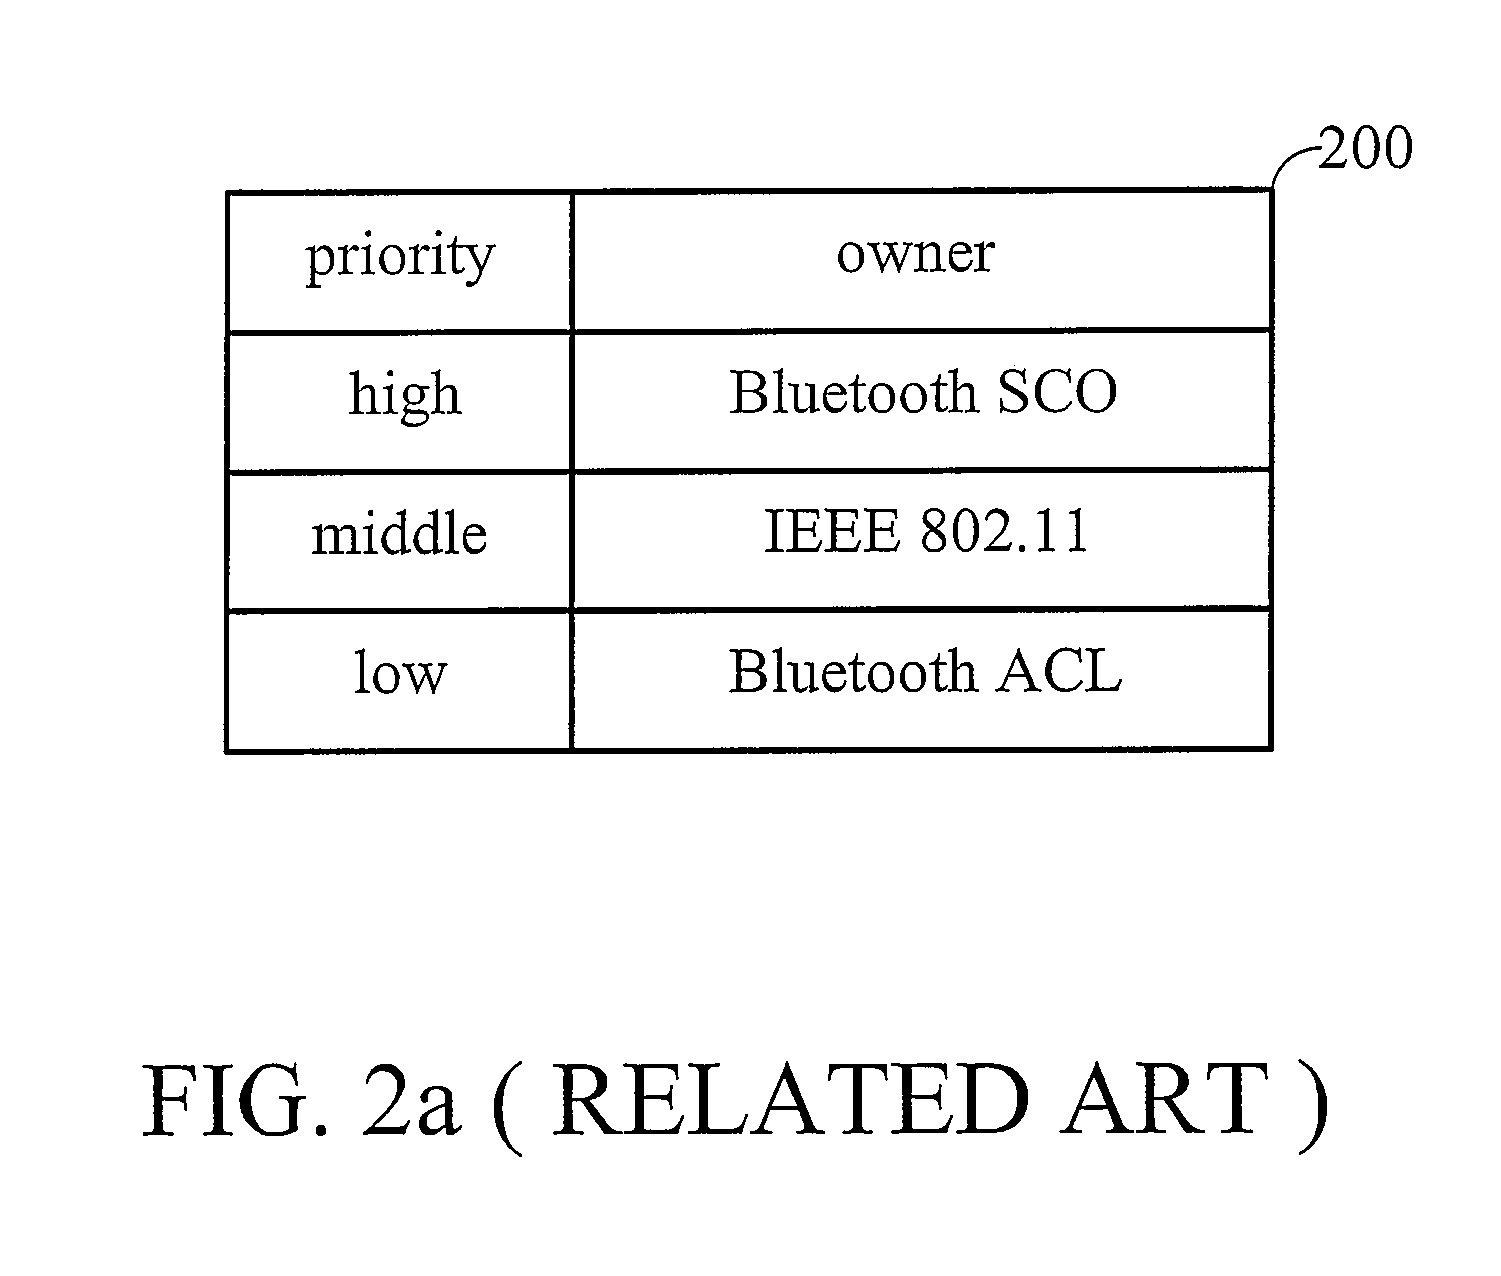 Method and apparatus for arbitration in a wireless device